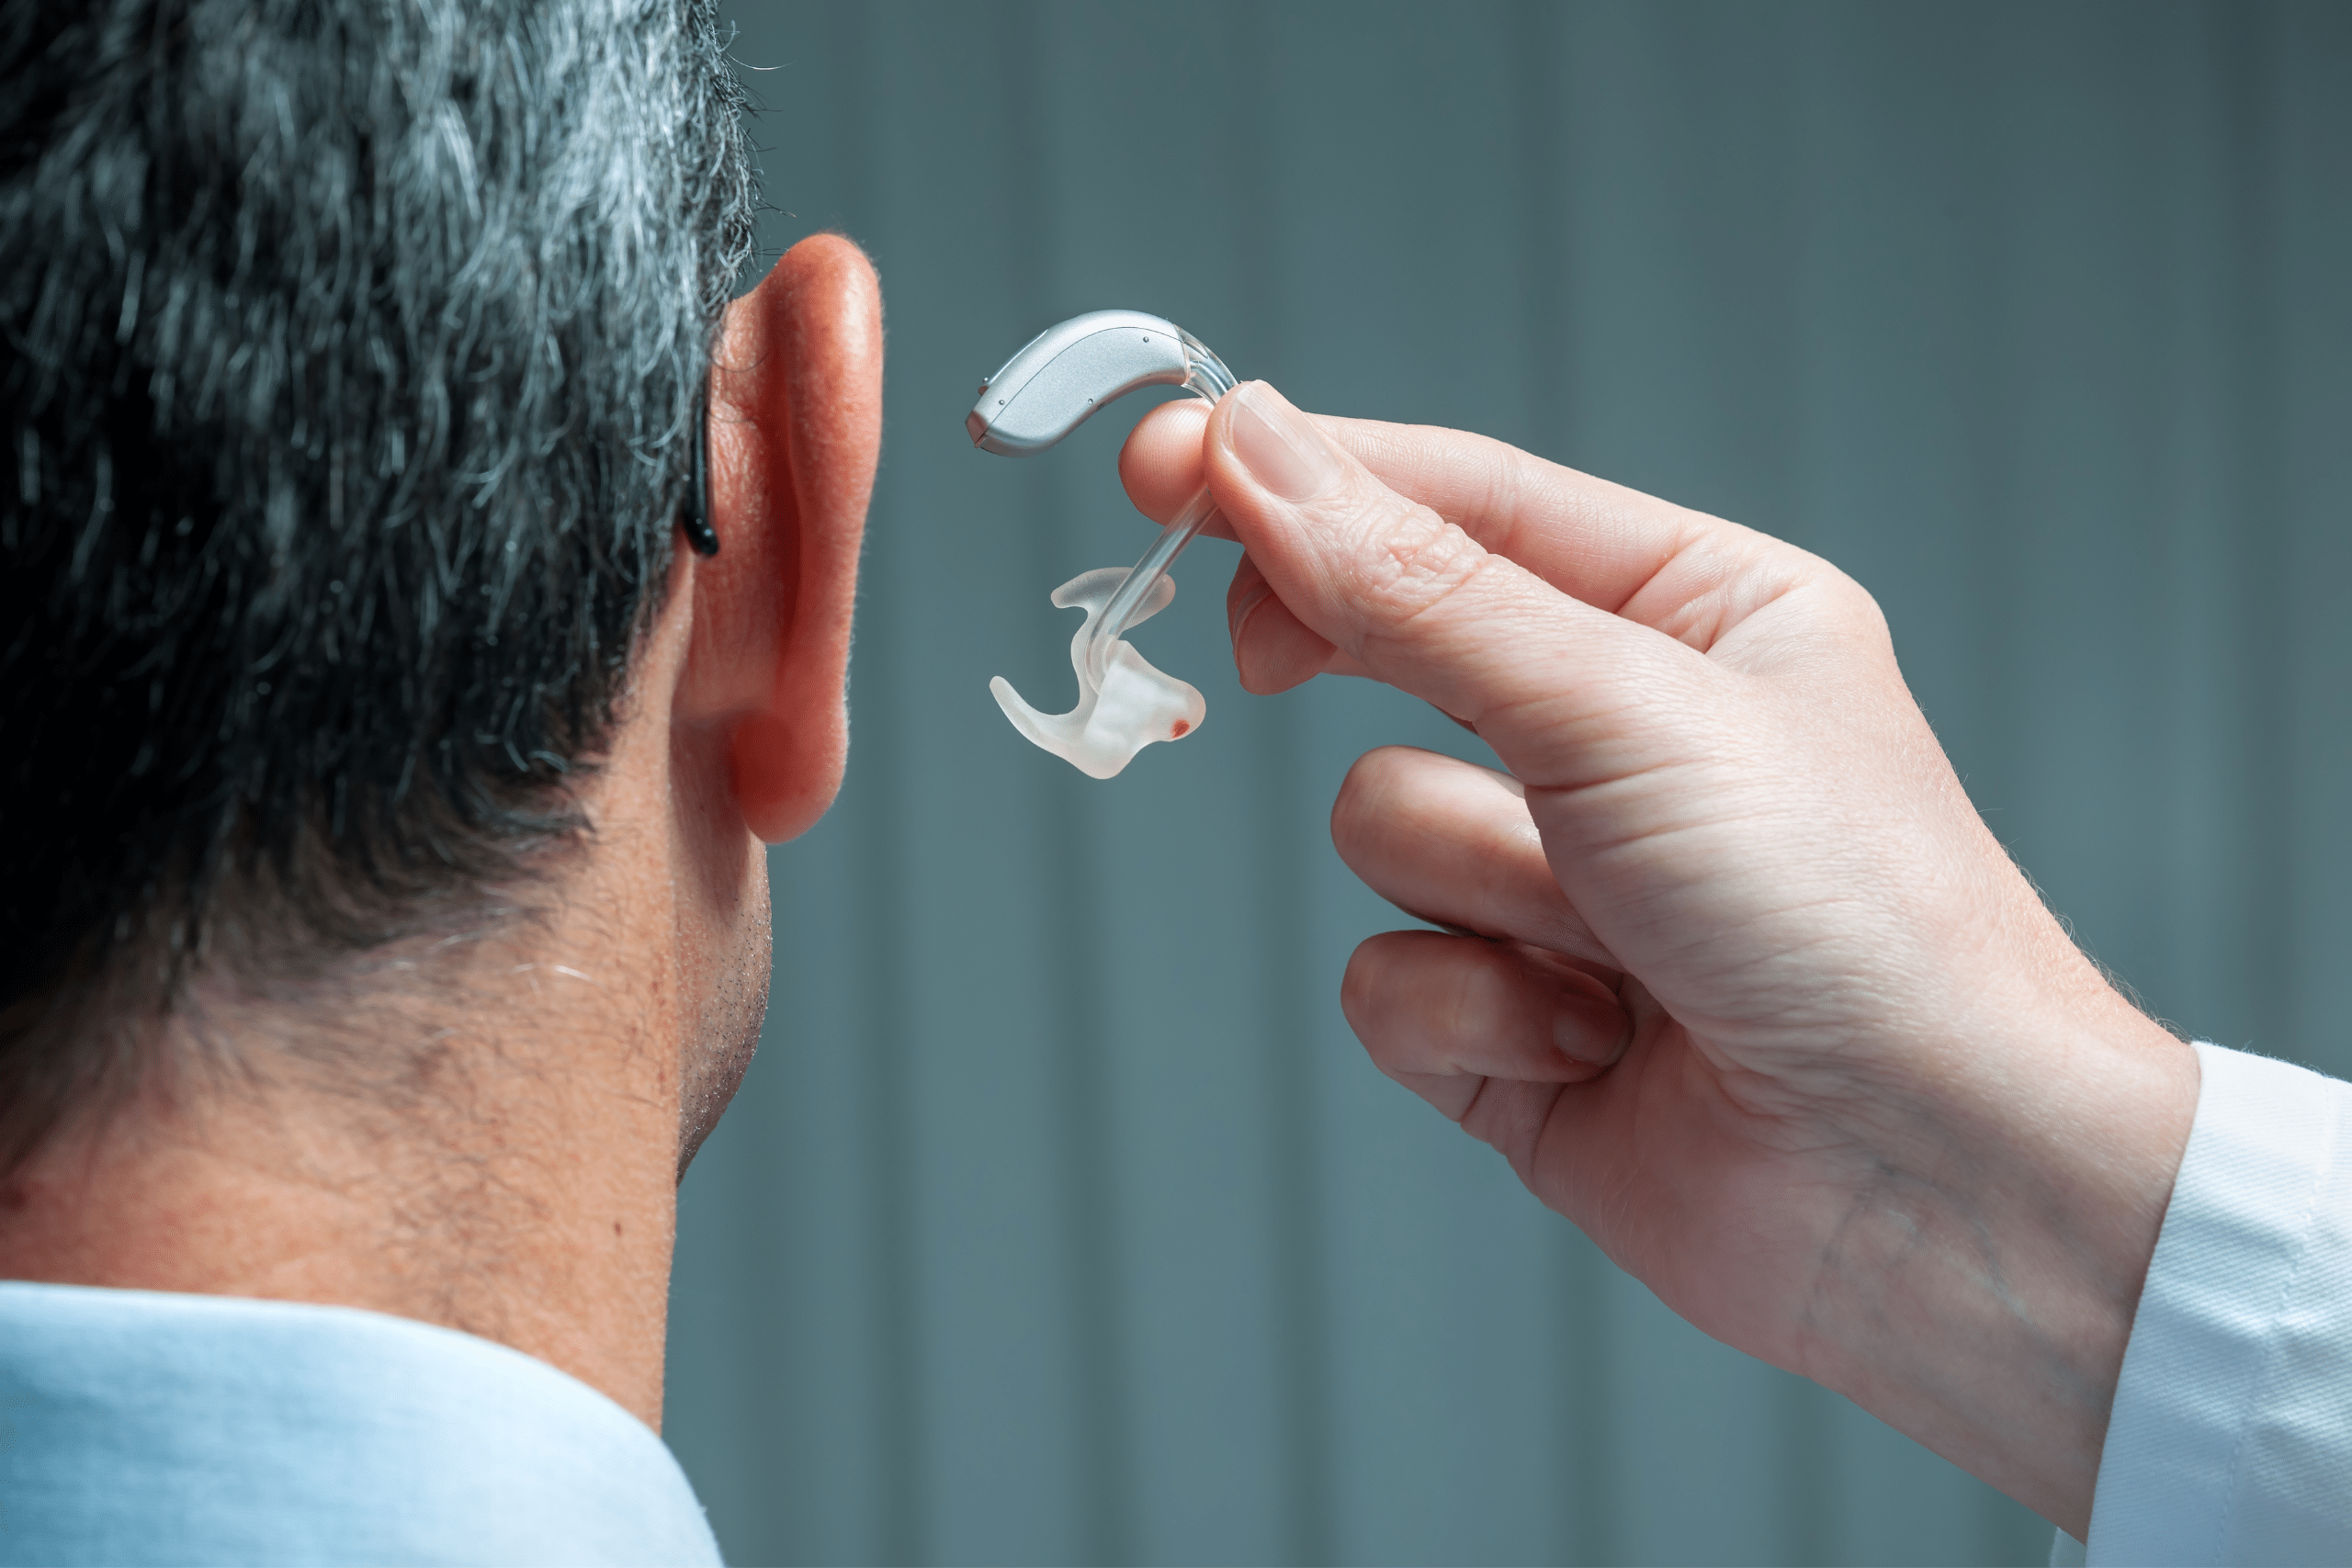 Over-the-Counter Hearing Aids Have BeenGreenlighted by the FDA